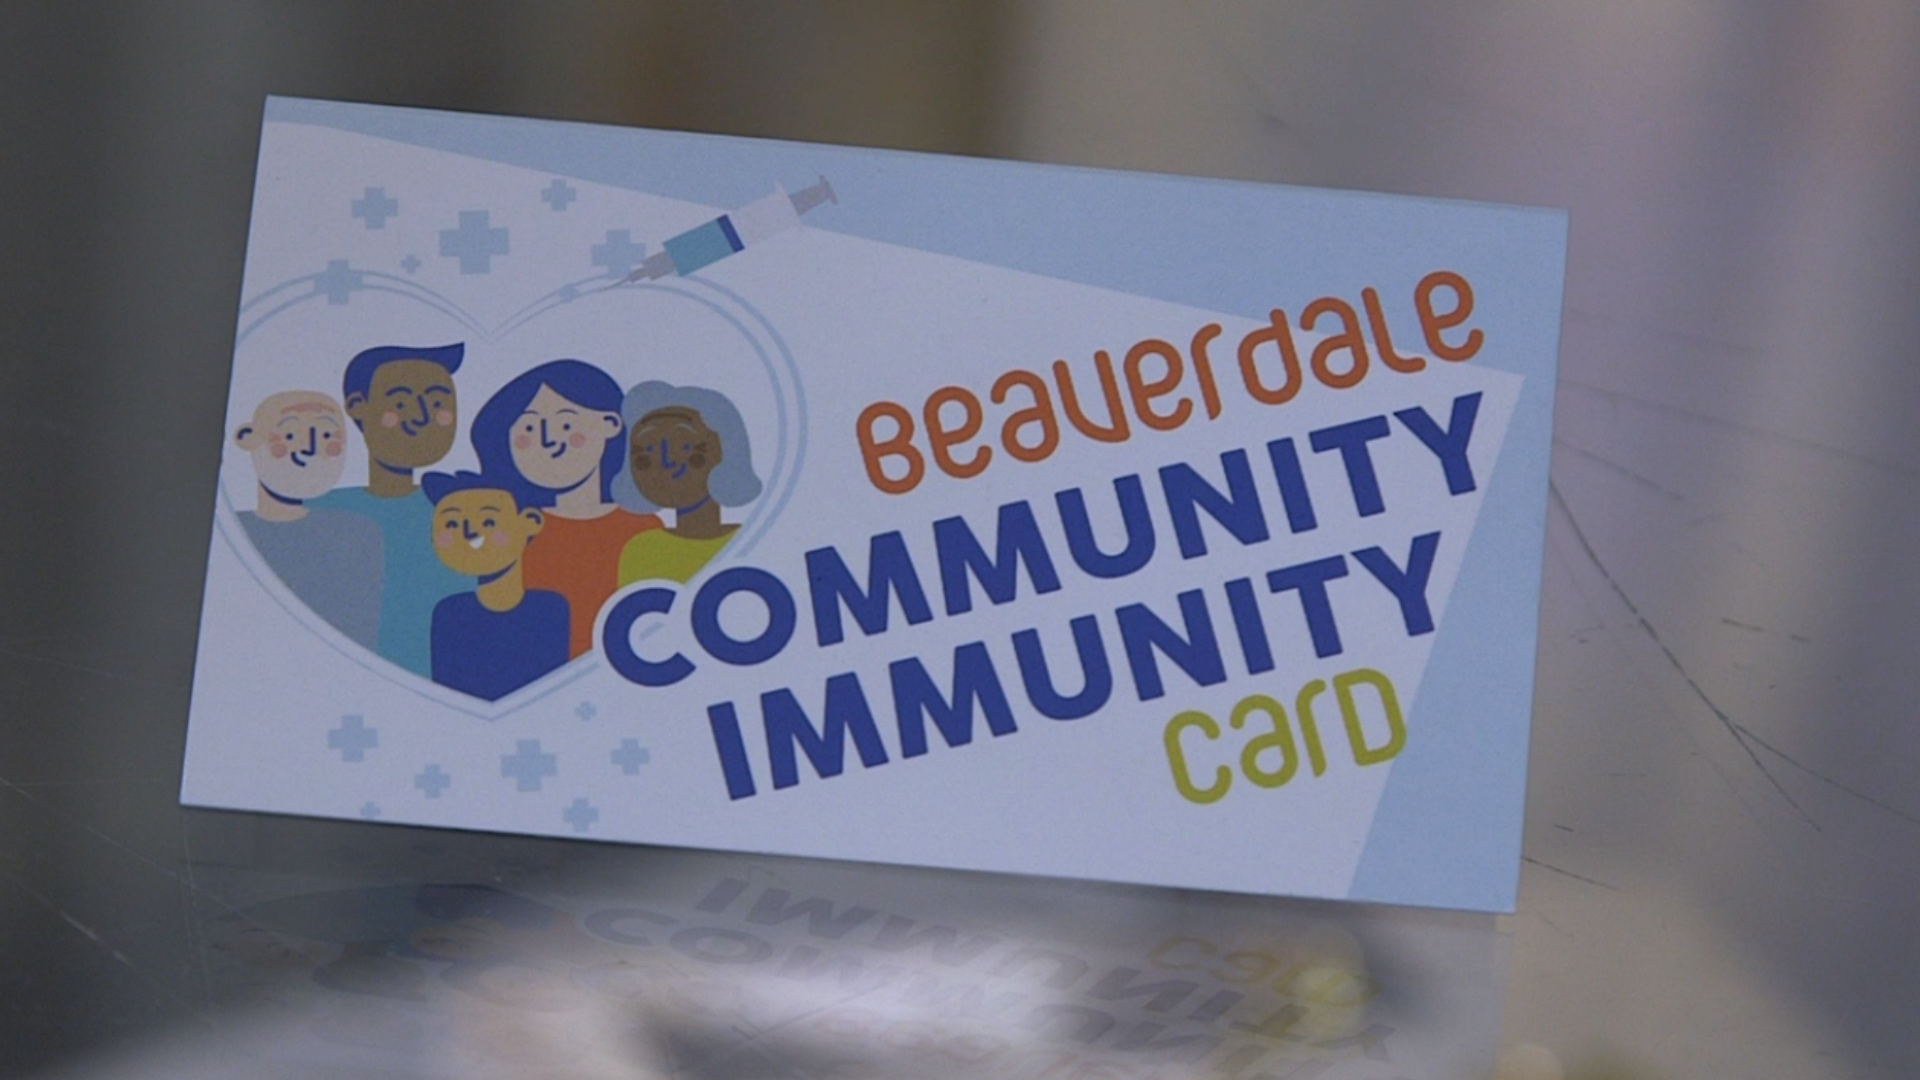 The "Community Immunity Card" allows Iowans who received their second dose at one of three participating pharmacies to get discounts at 16 Beaverdale stores.